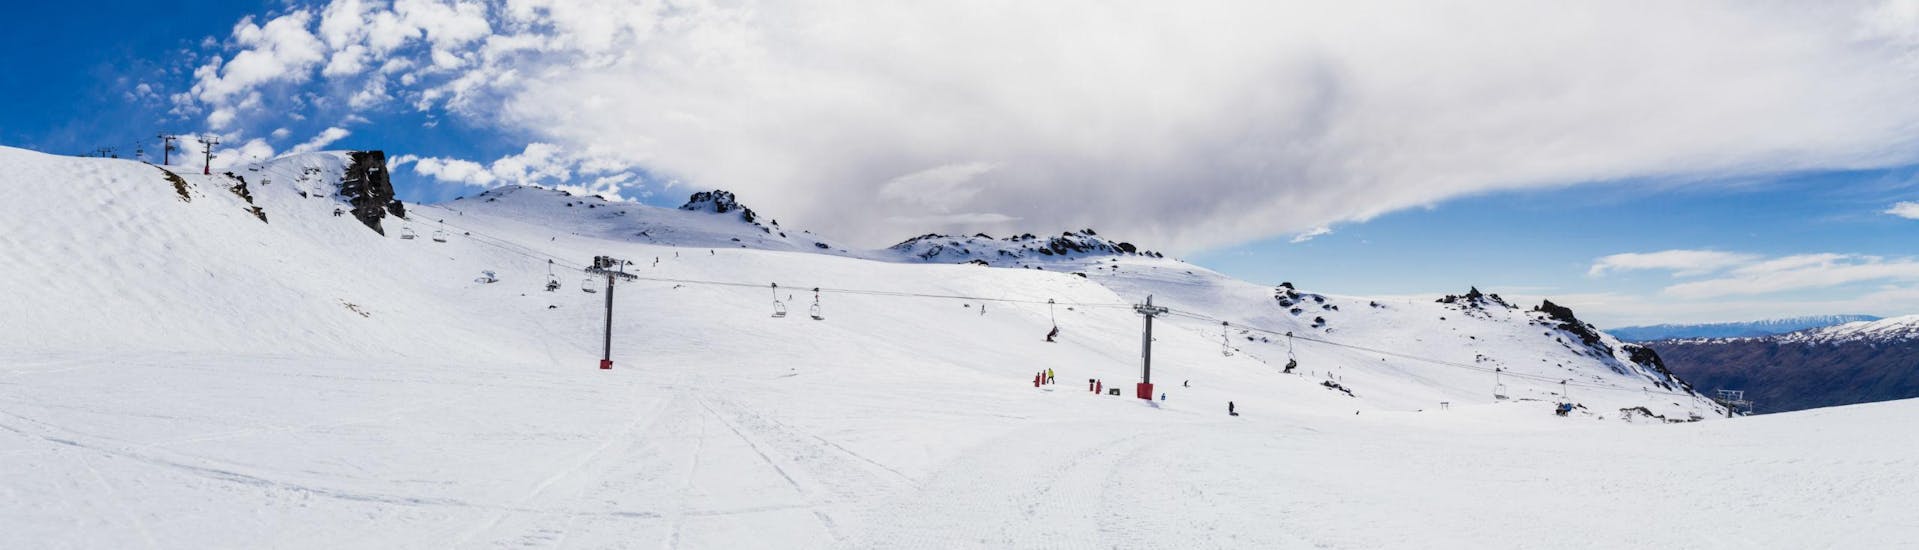 An image of the snow park in the Cardrona Alpine Resort, where visitors can book ski lessons and learn to ski.